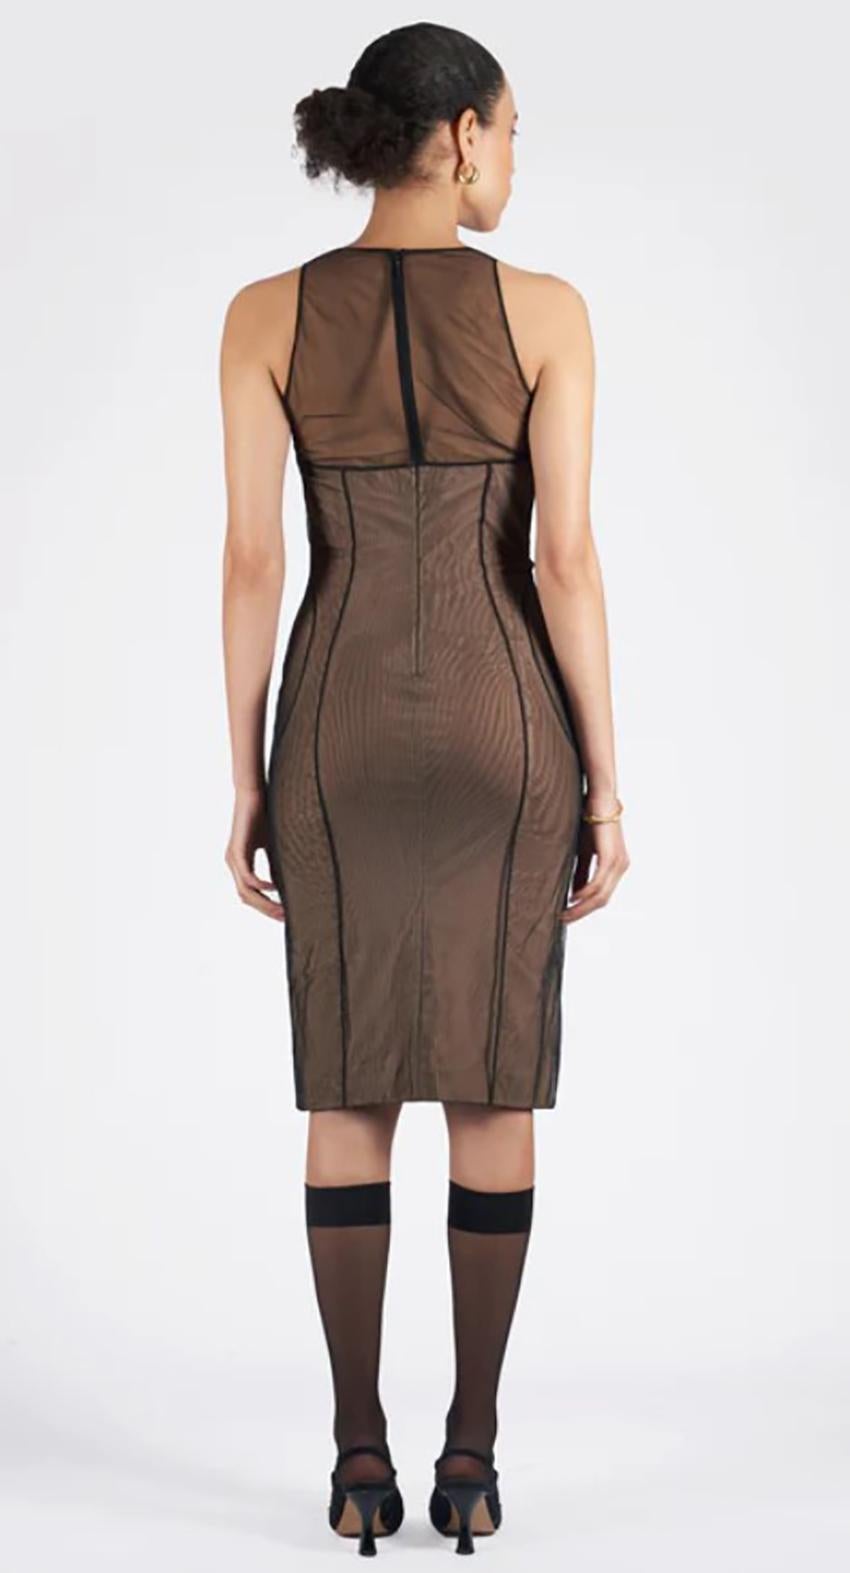 Women's S/S 2001 TOM FORD for GUCCI VINTAGE NUDE/BLACK MESH DRESS IT 42 - US 6